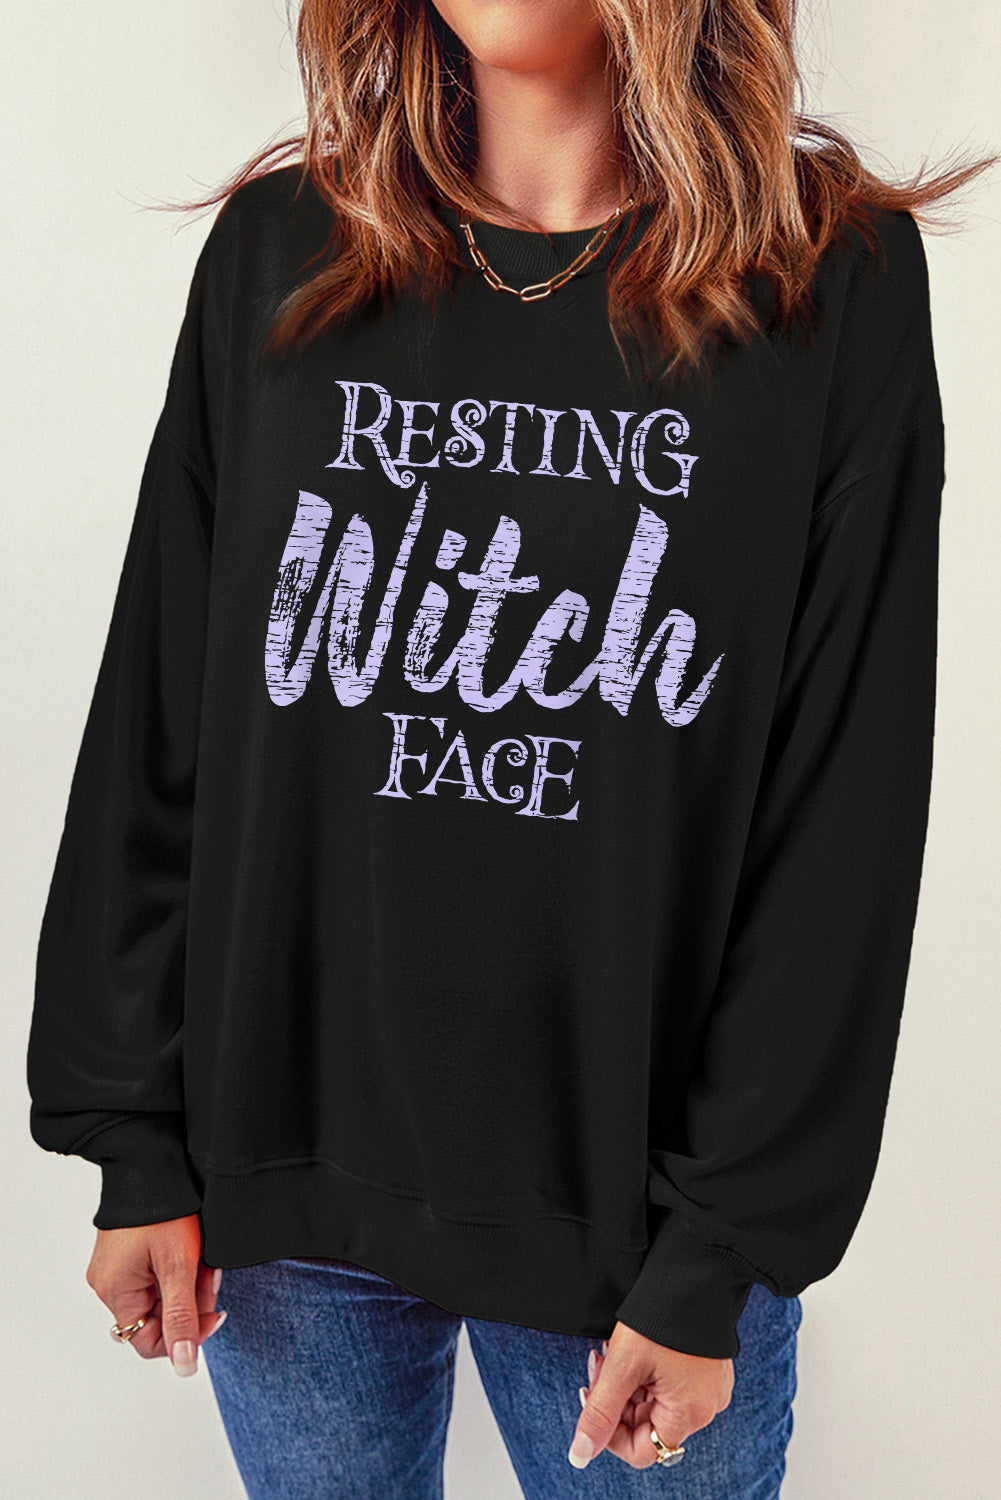 Black RESTING Witch FACE Graphic Pullover Sweatshirt